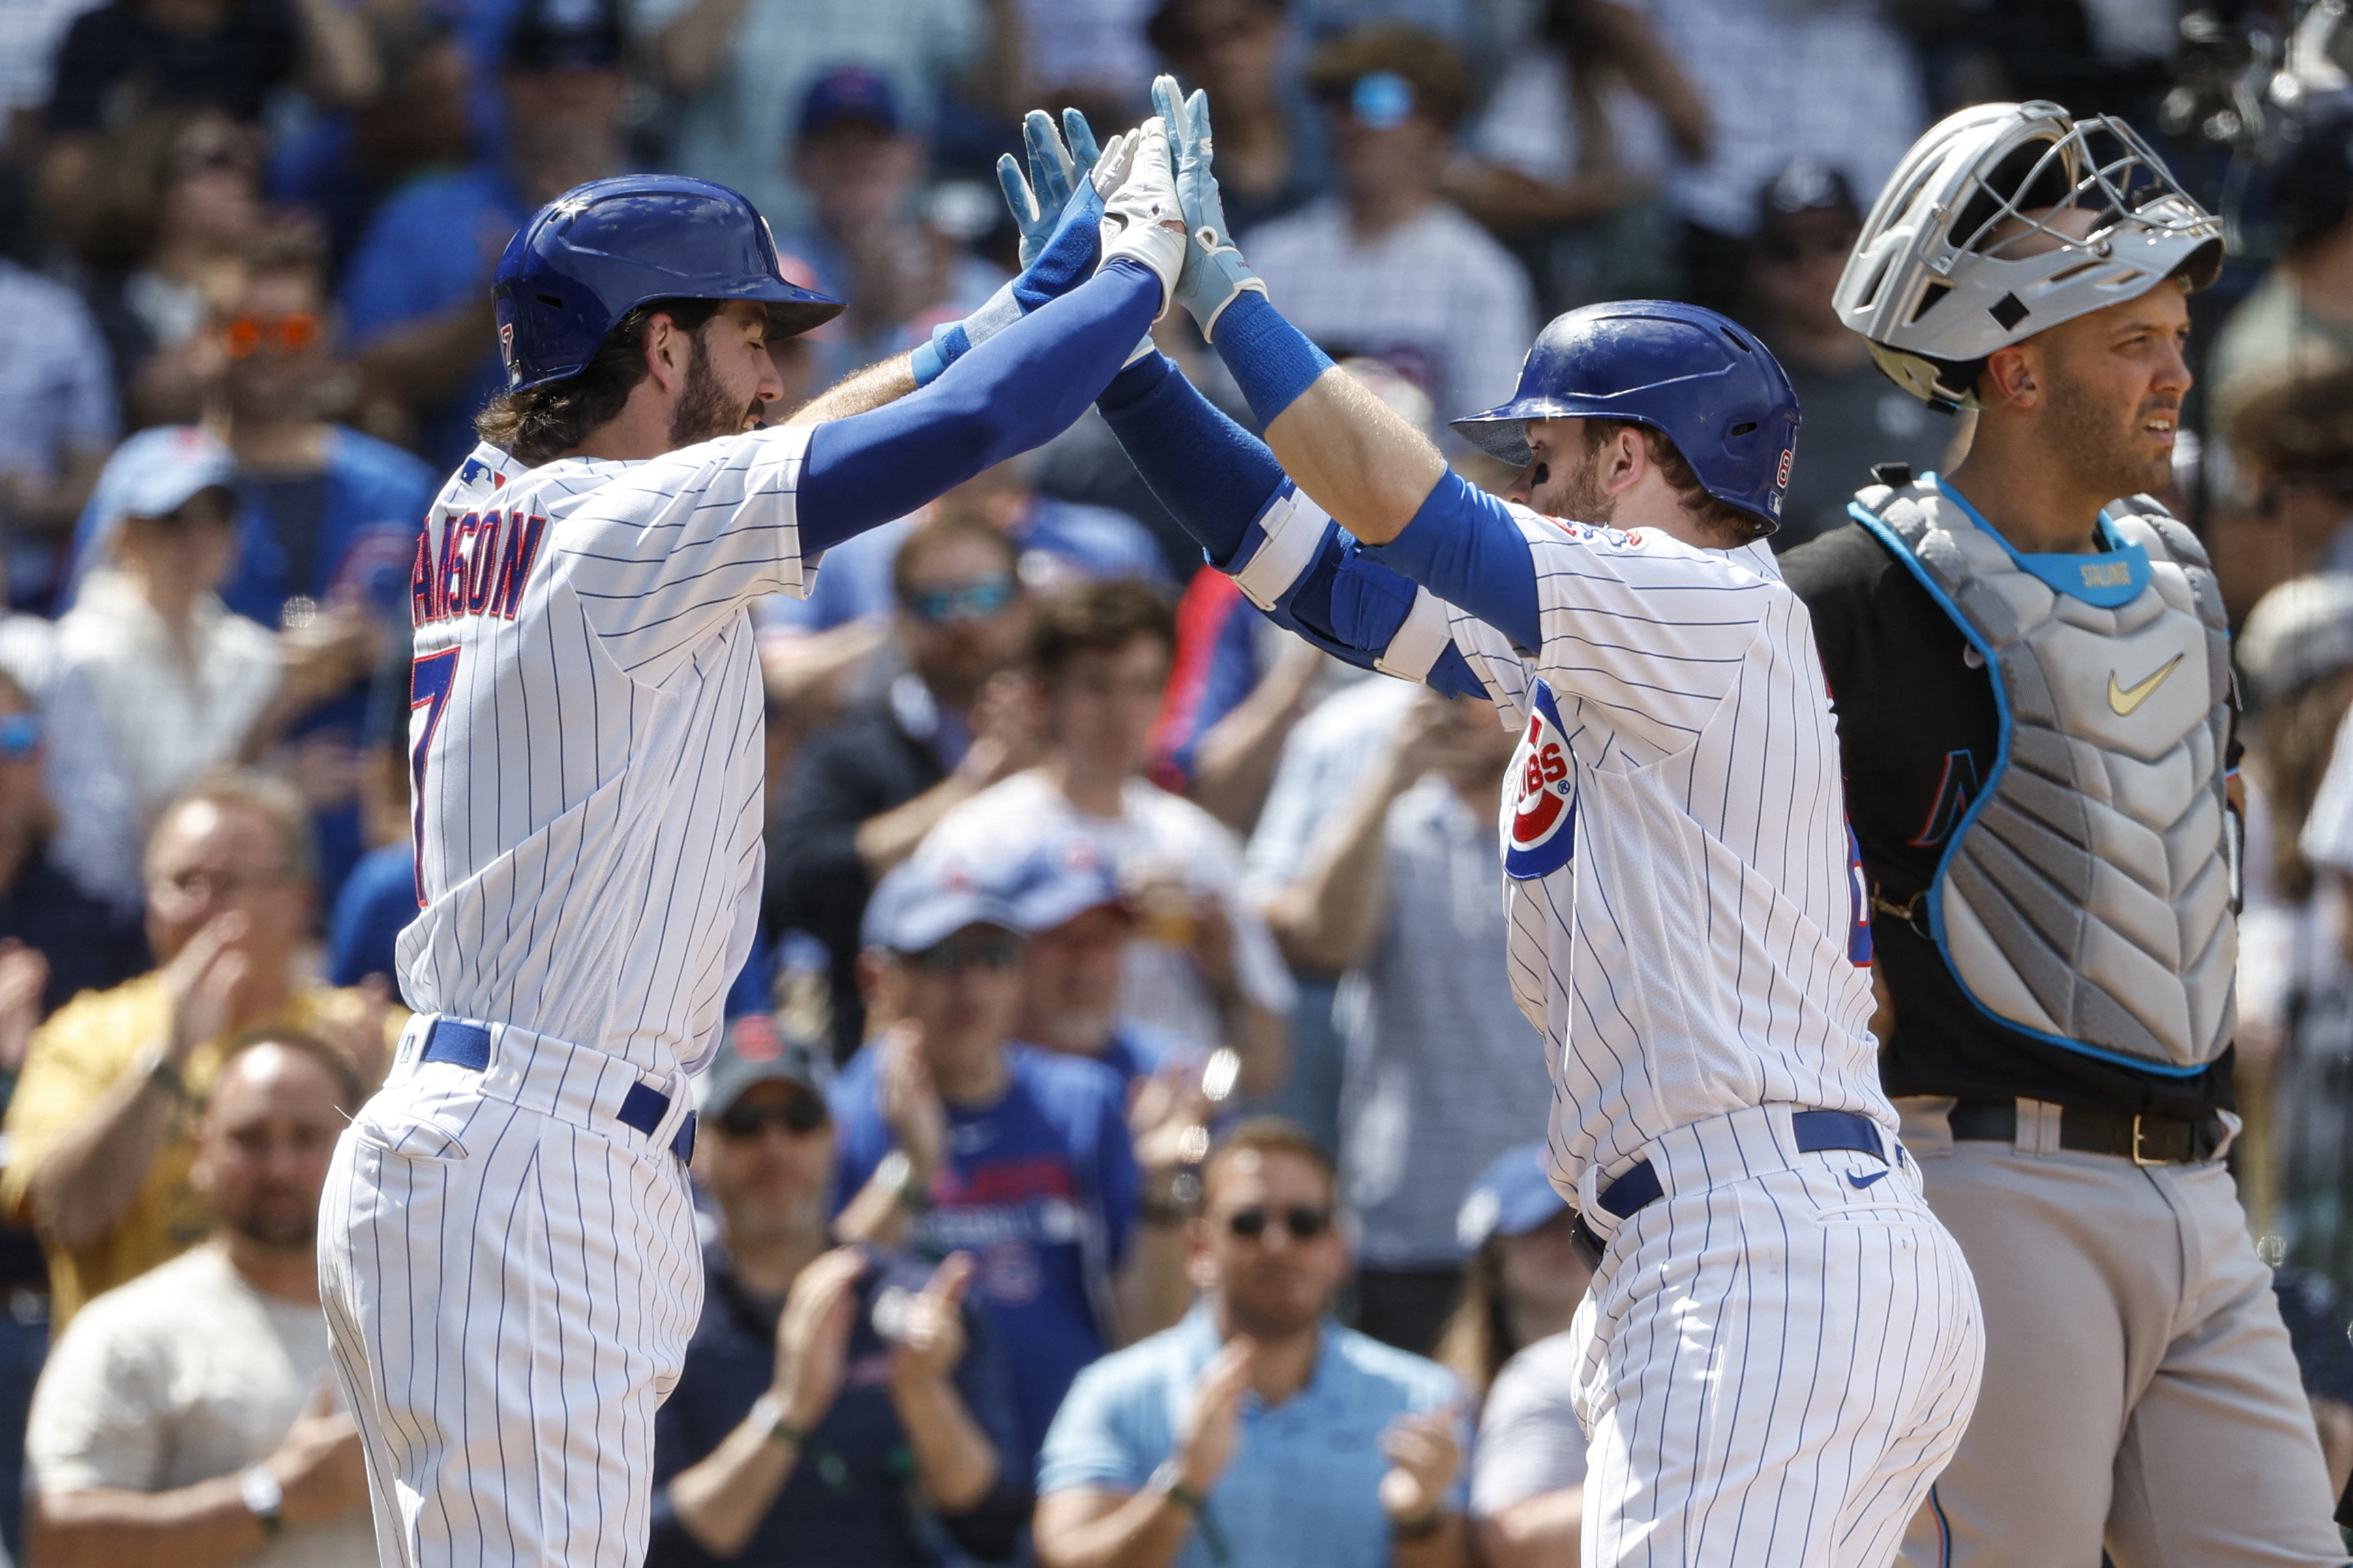 Justin Steele stays dominant, Cubs hand Marlins fourth straight